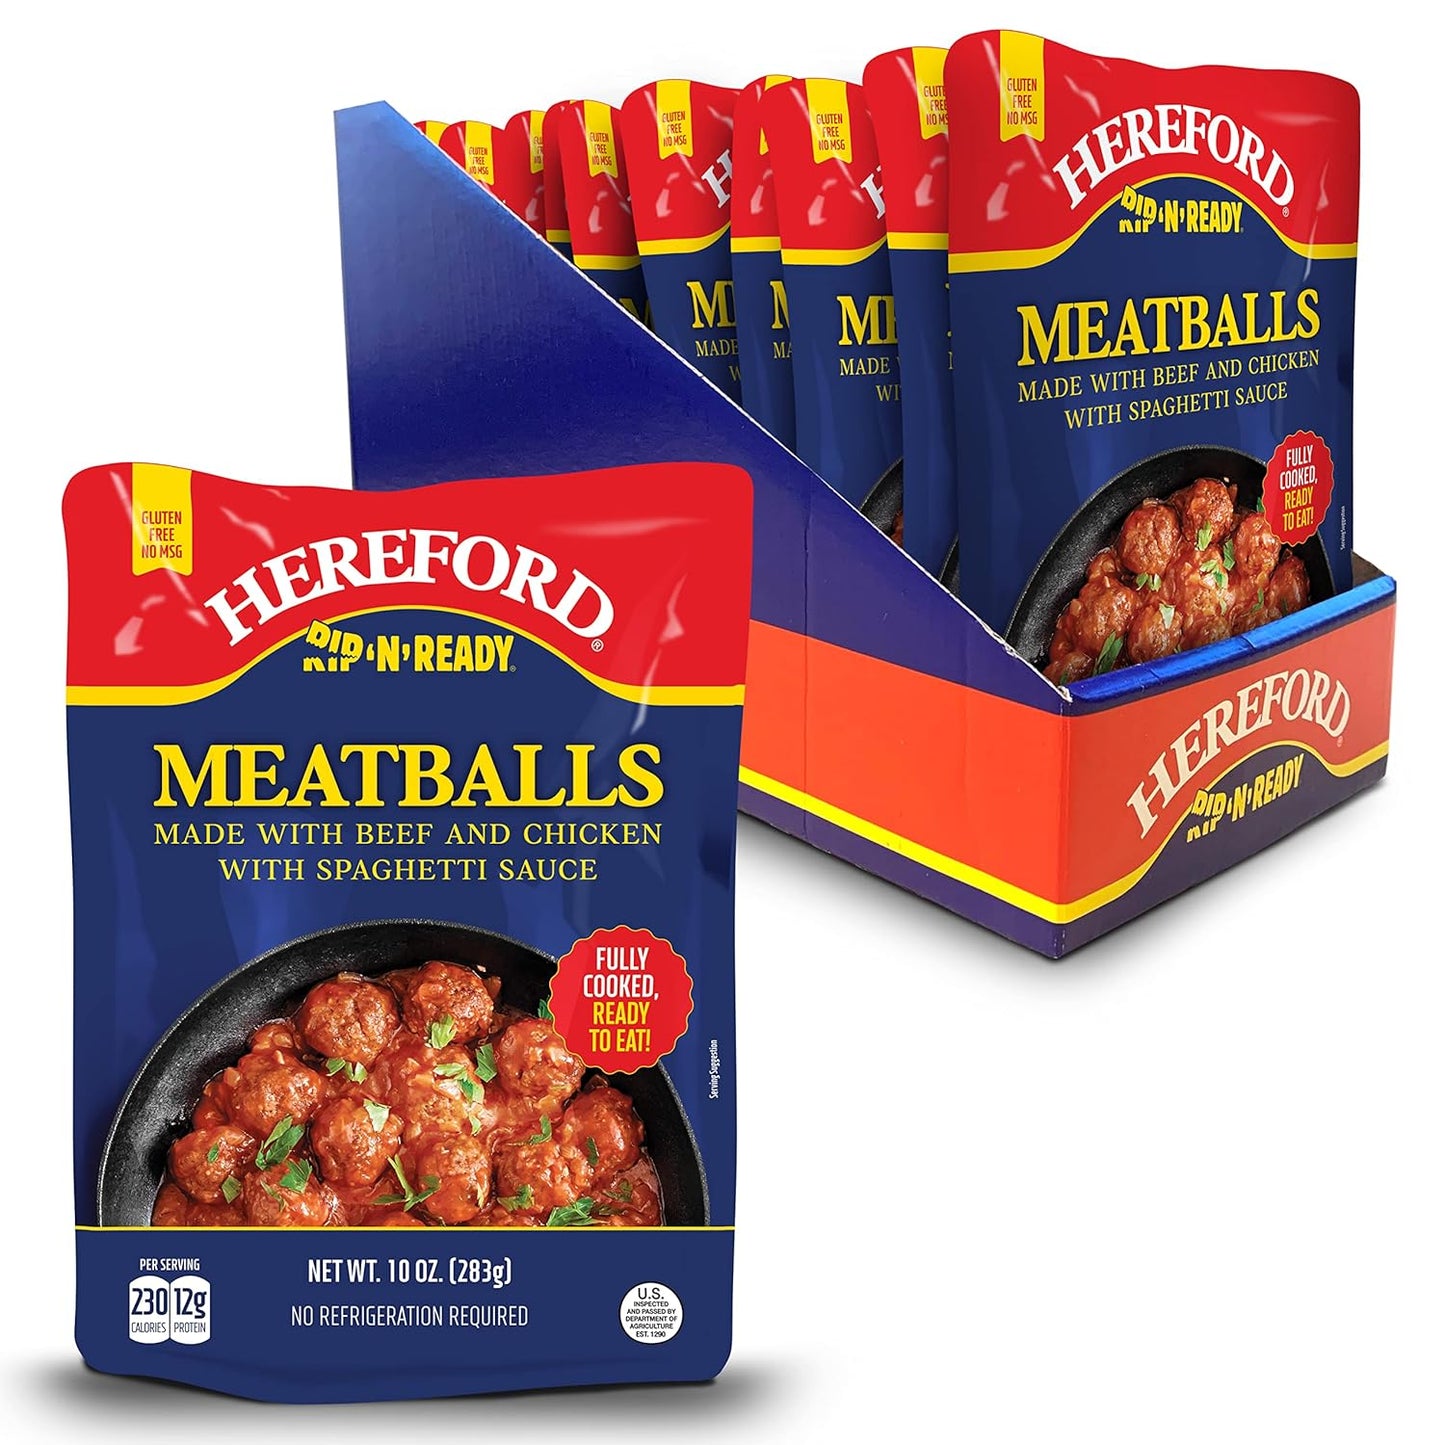 Hereford Meatballs with Spaghetti Sauce | Shelf Stable | Fully Cooked | Ready to Eat | 12g Protein per Serving | 10oz per Pouch (Case of 12)